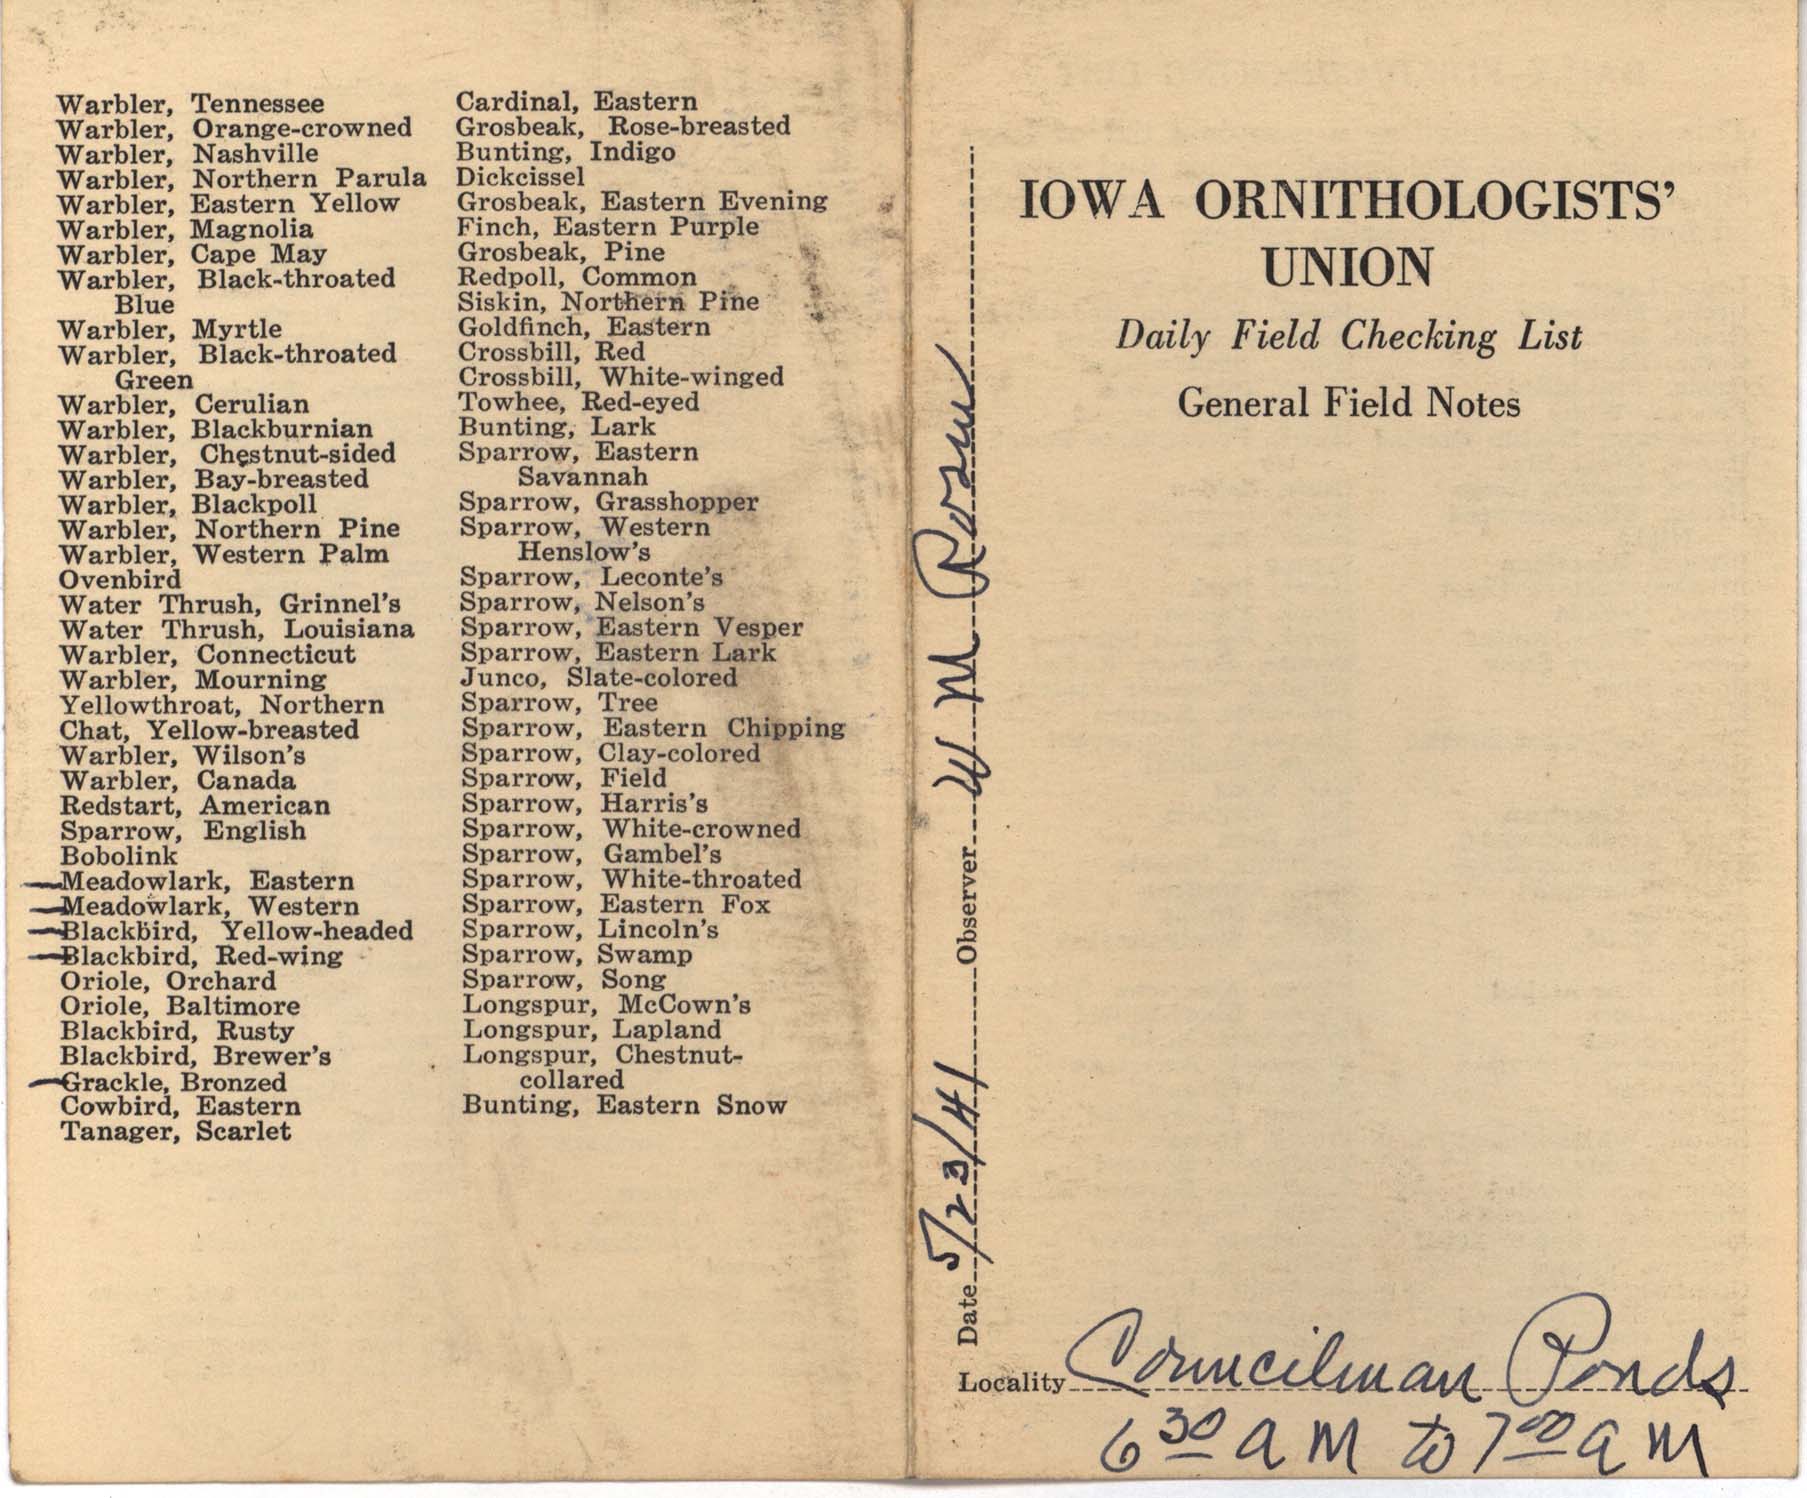 Daily field checking list by Walter Rosene, May 23, 1941